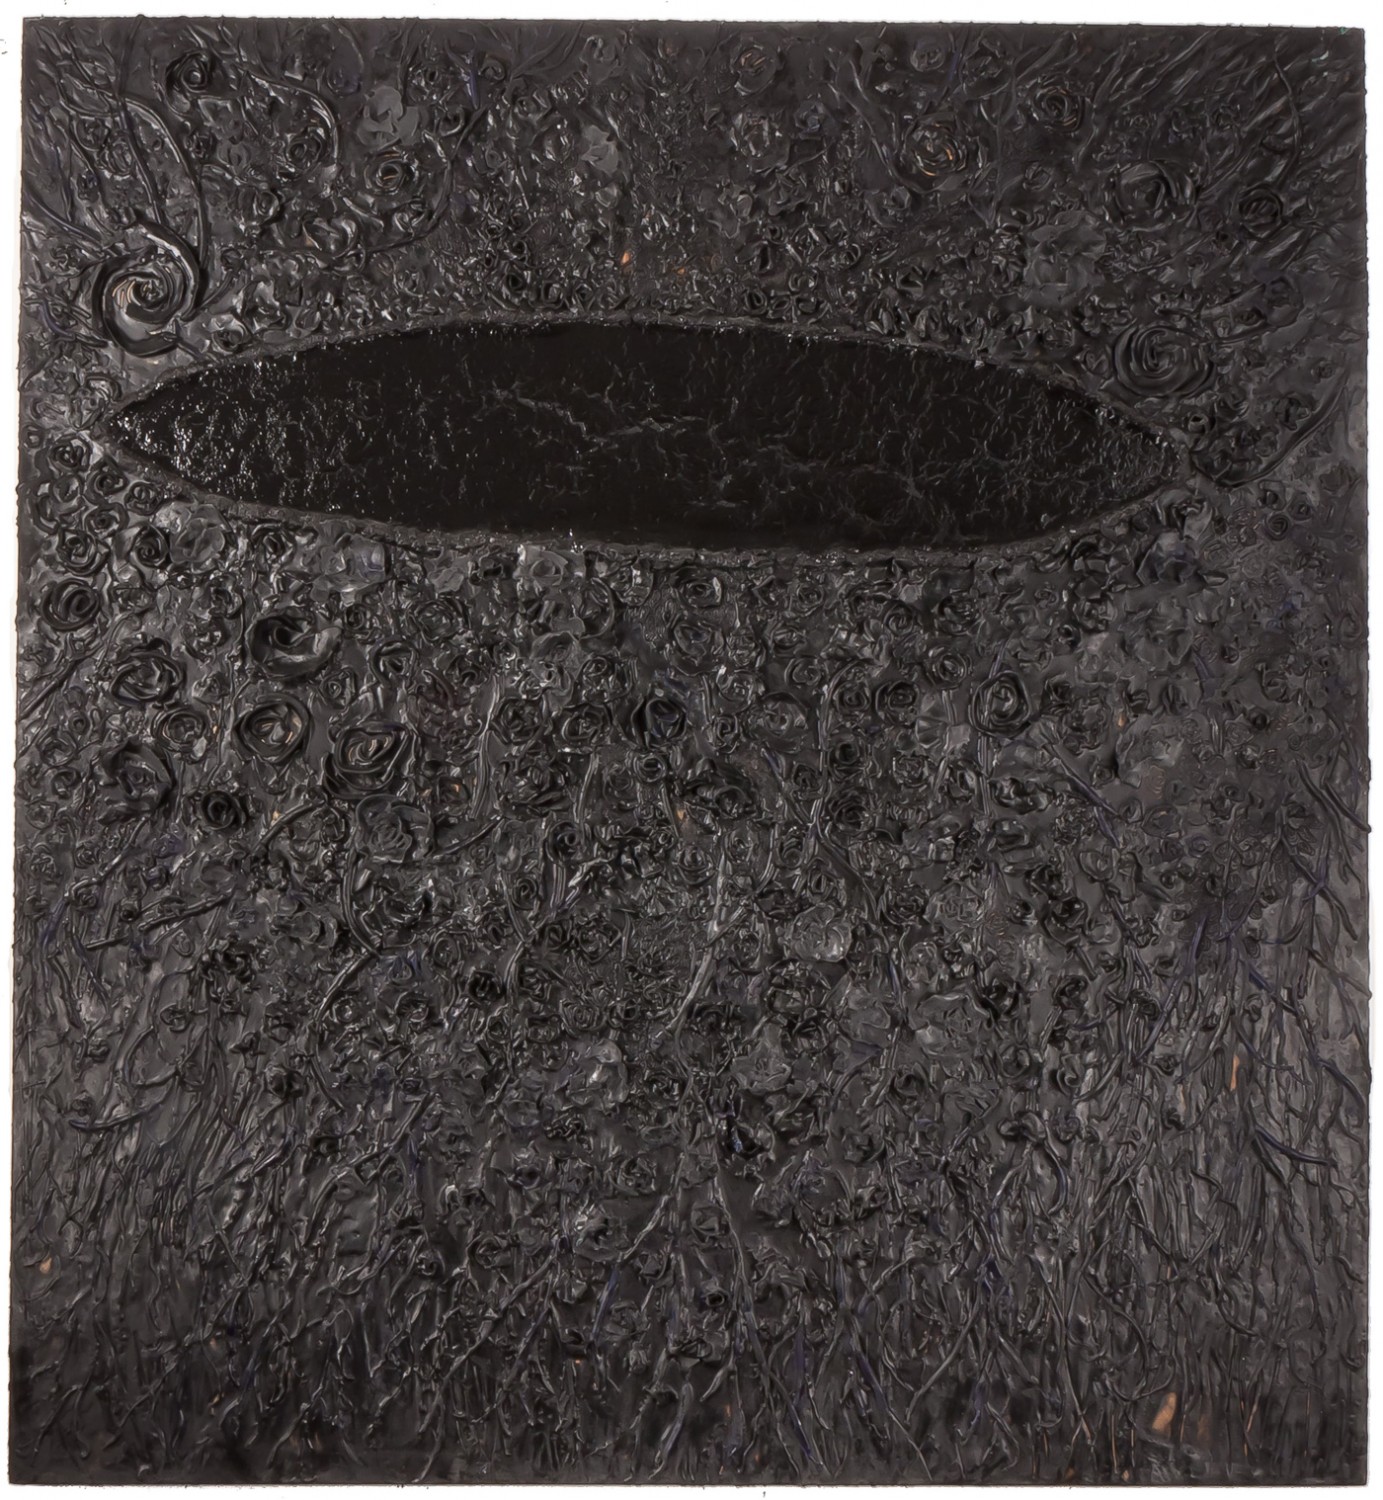 Whole, 2010, encaustic and urethane on panel, 66 x 60 inches